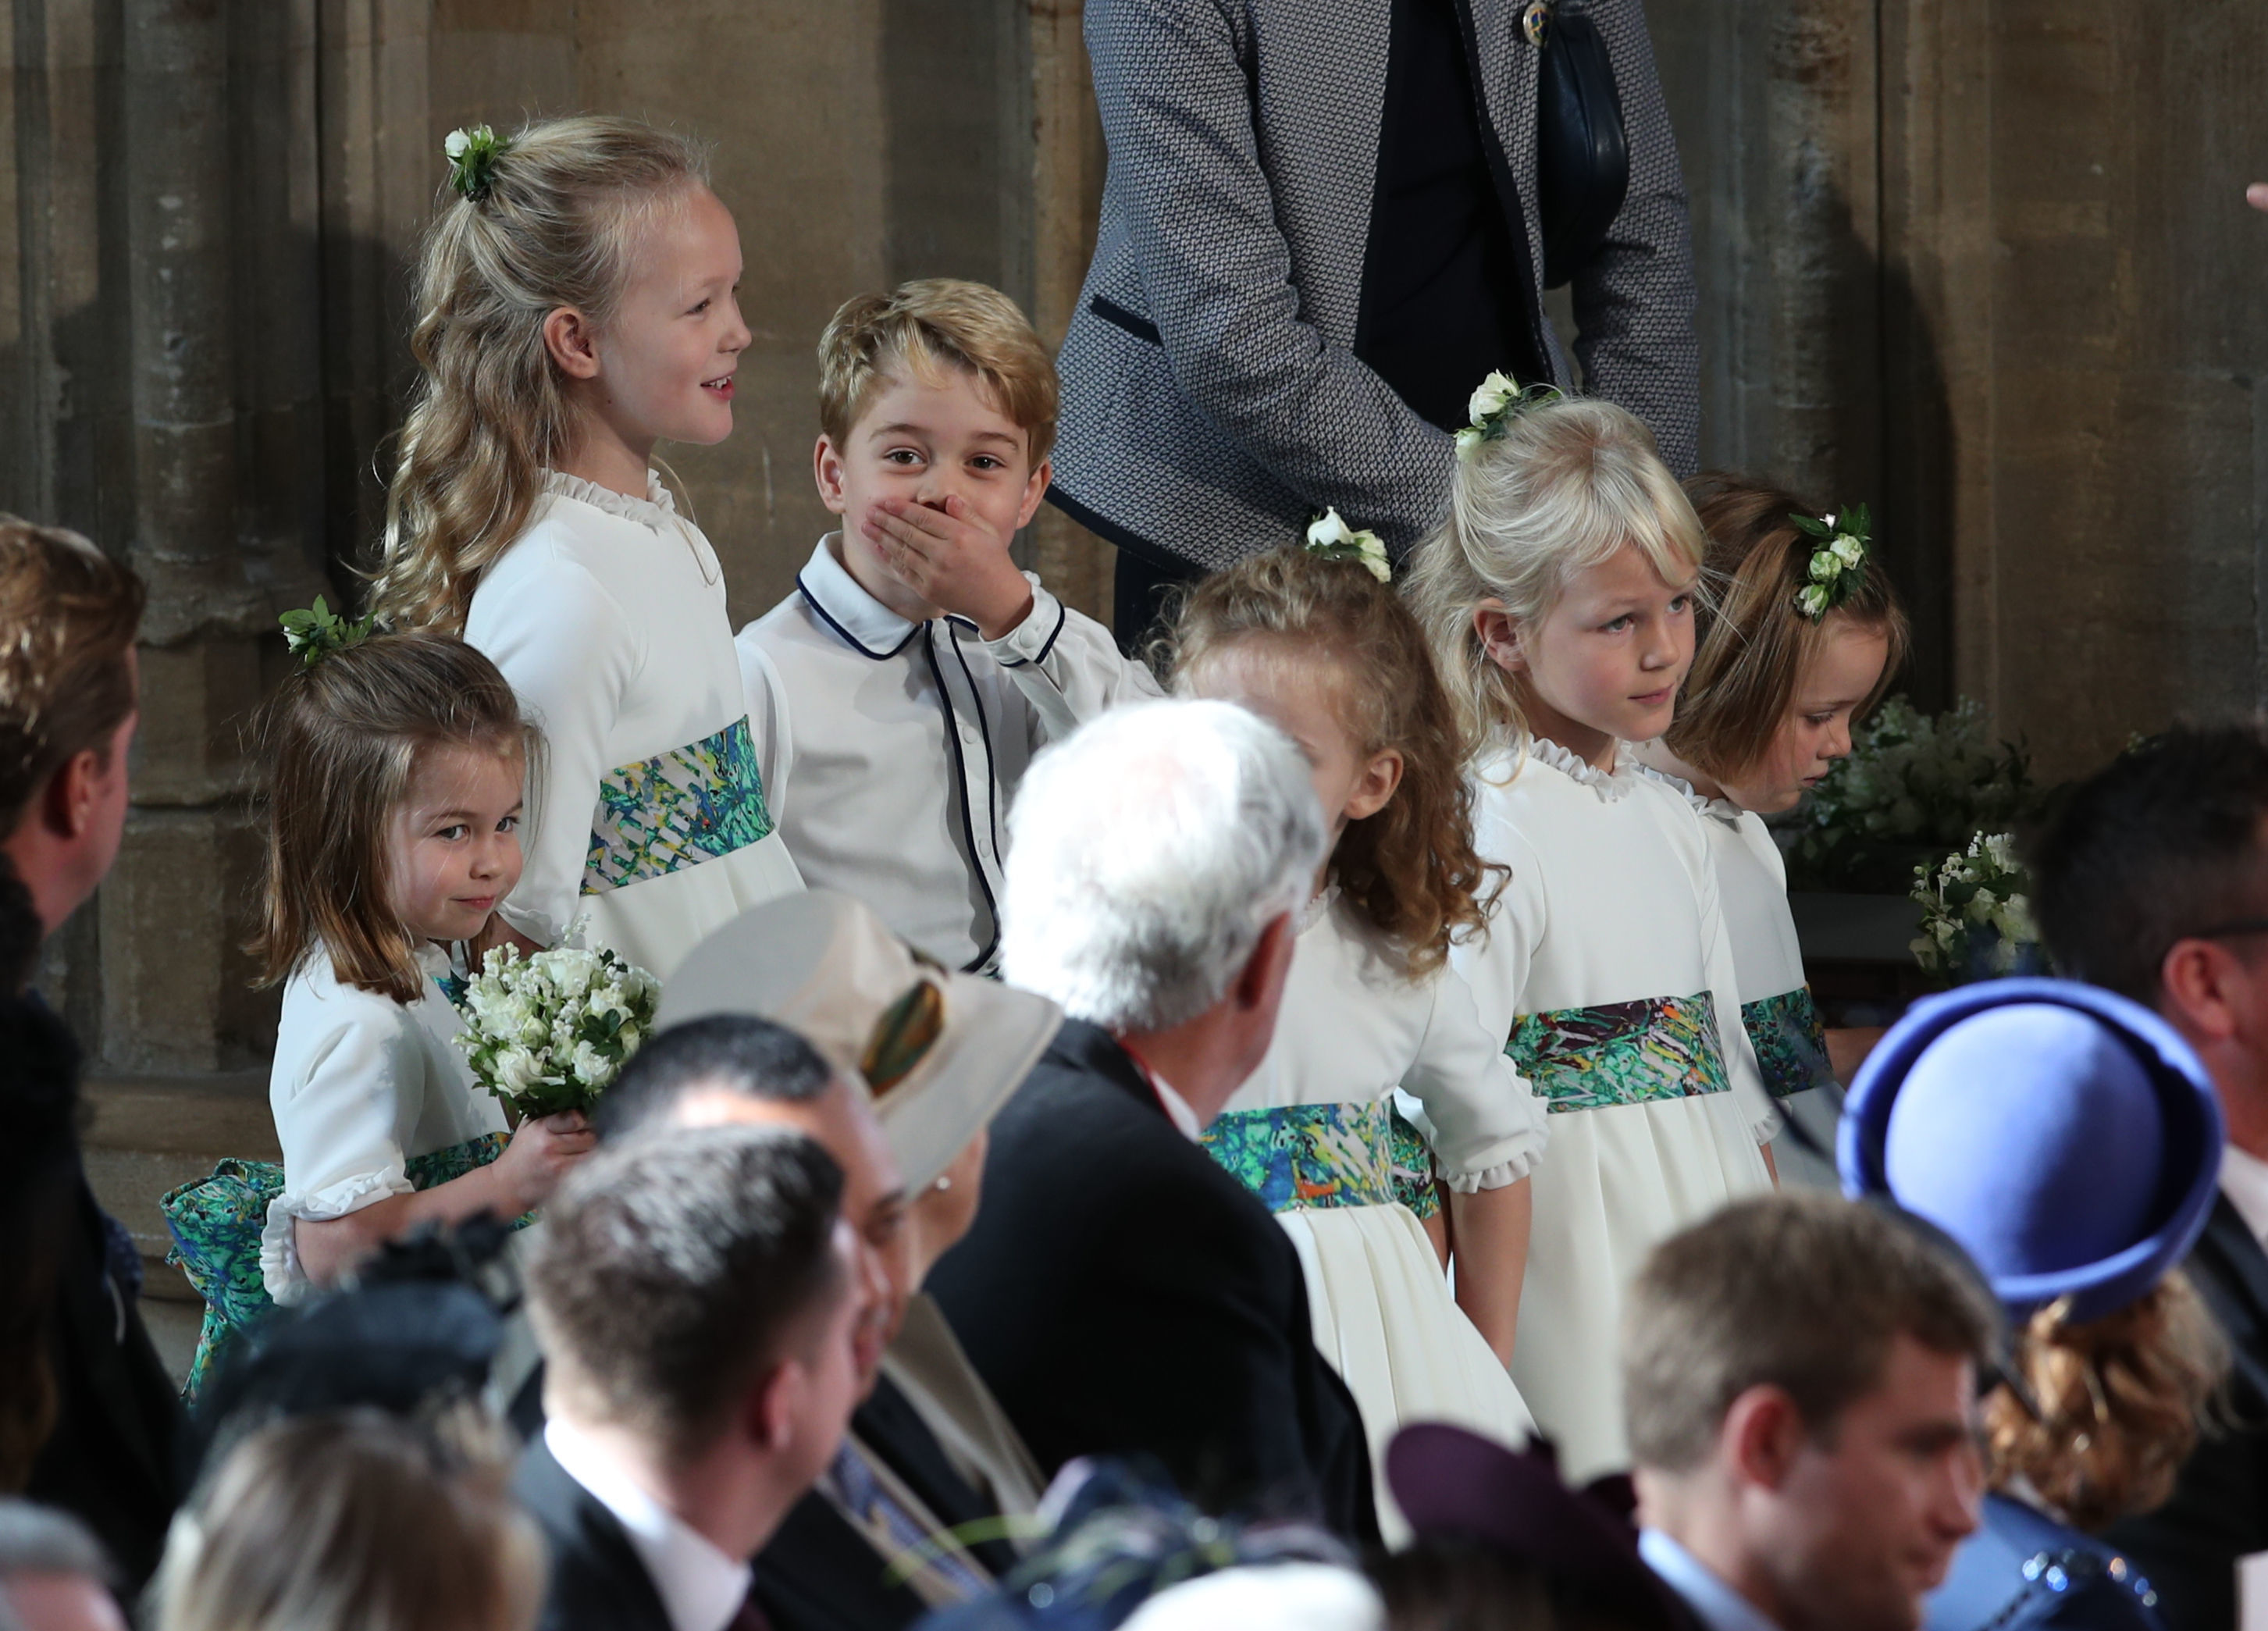 The bridesmaids and page boys, including Princess Charlotte of Cambridge (L), Savannah Phillips (2L) and Prince George of Cambridge (3L) wait to take part in the wedding of Britain's Princess Eugenie of York to Jack Brooksbank at St George's Chapel, Windsor Castle, in Windsor, on October 12, 2018. (Photo by Yui Mok / POOL / AFP) (Photo credit should read YUI MOK/AFP/Getty Images) (YUI MOK—AFP/Getty Images)